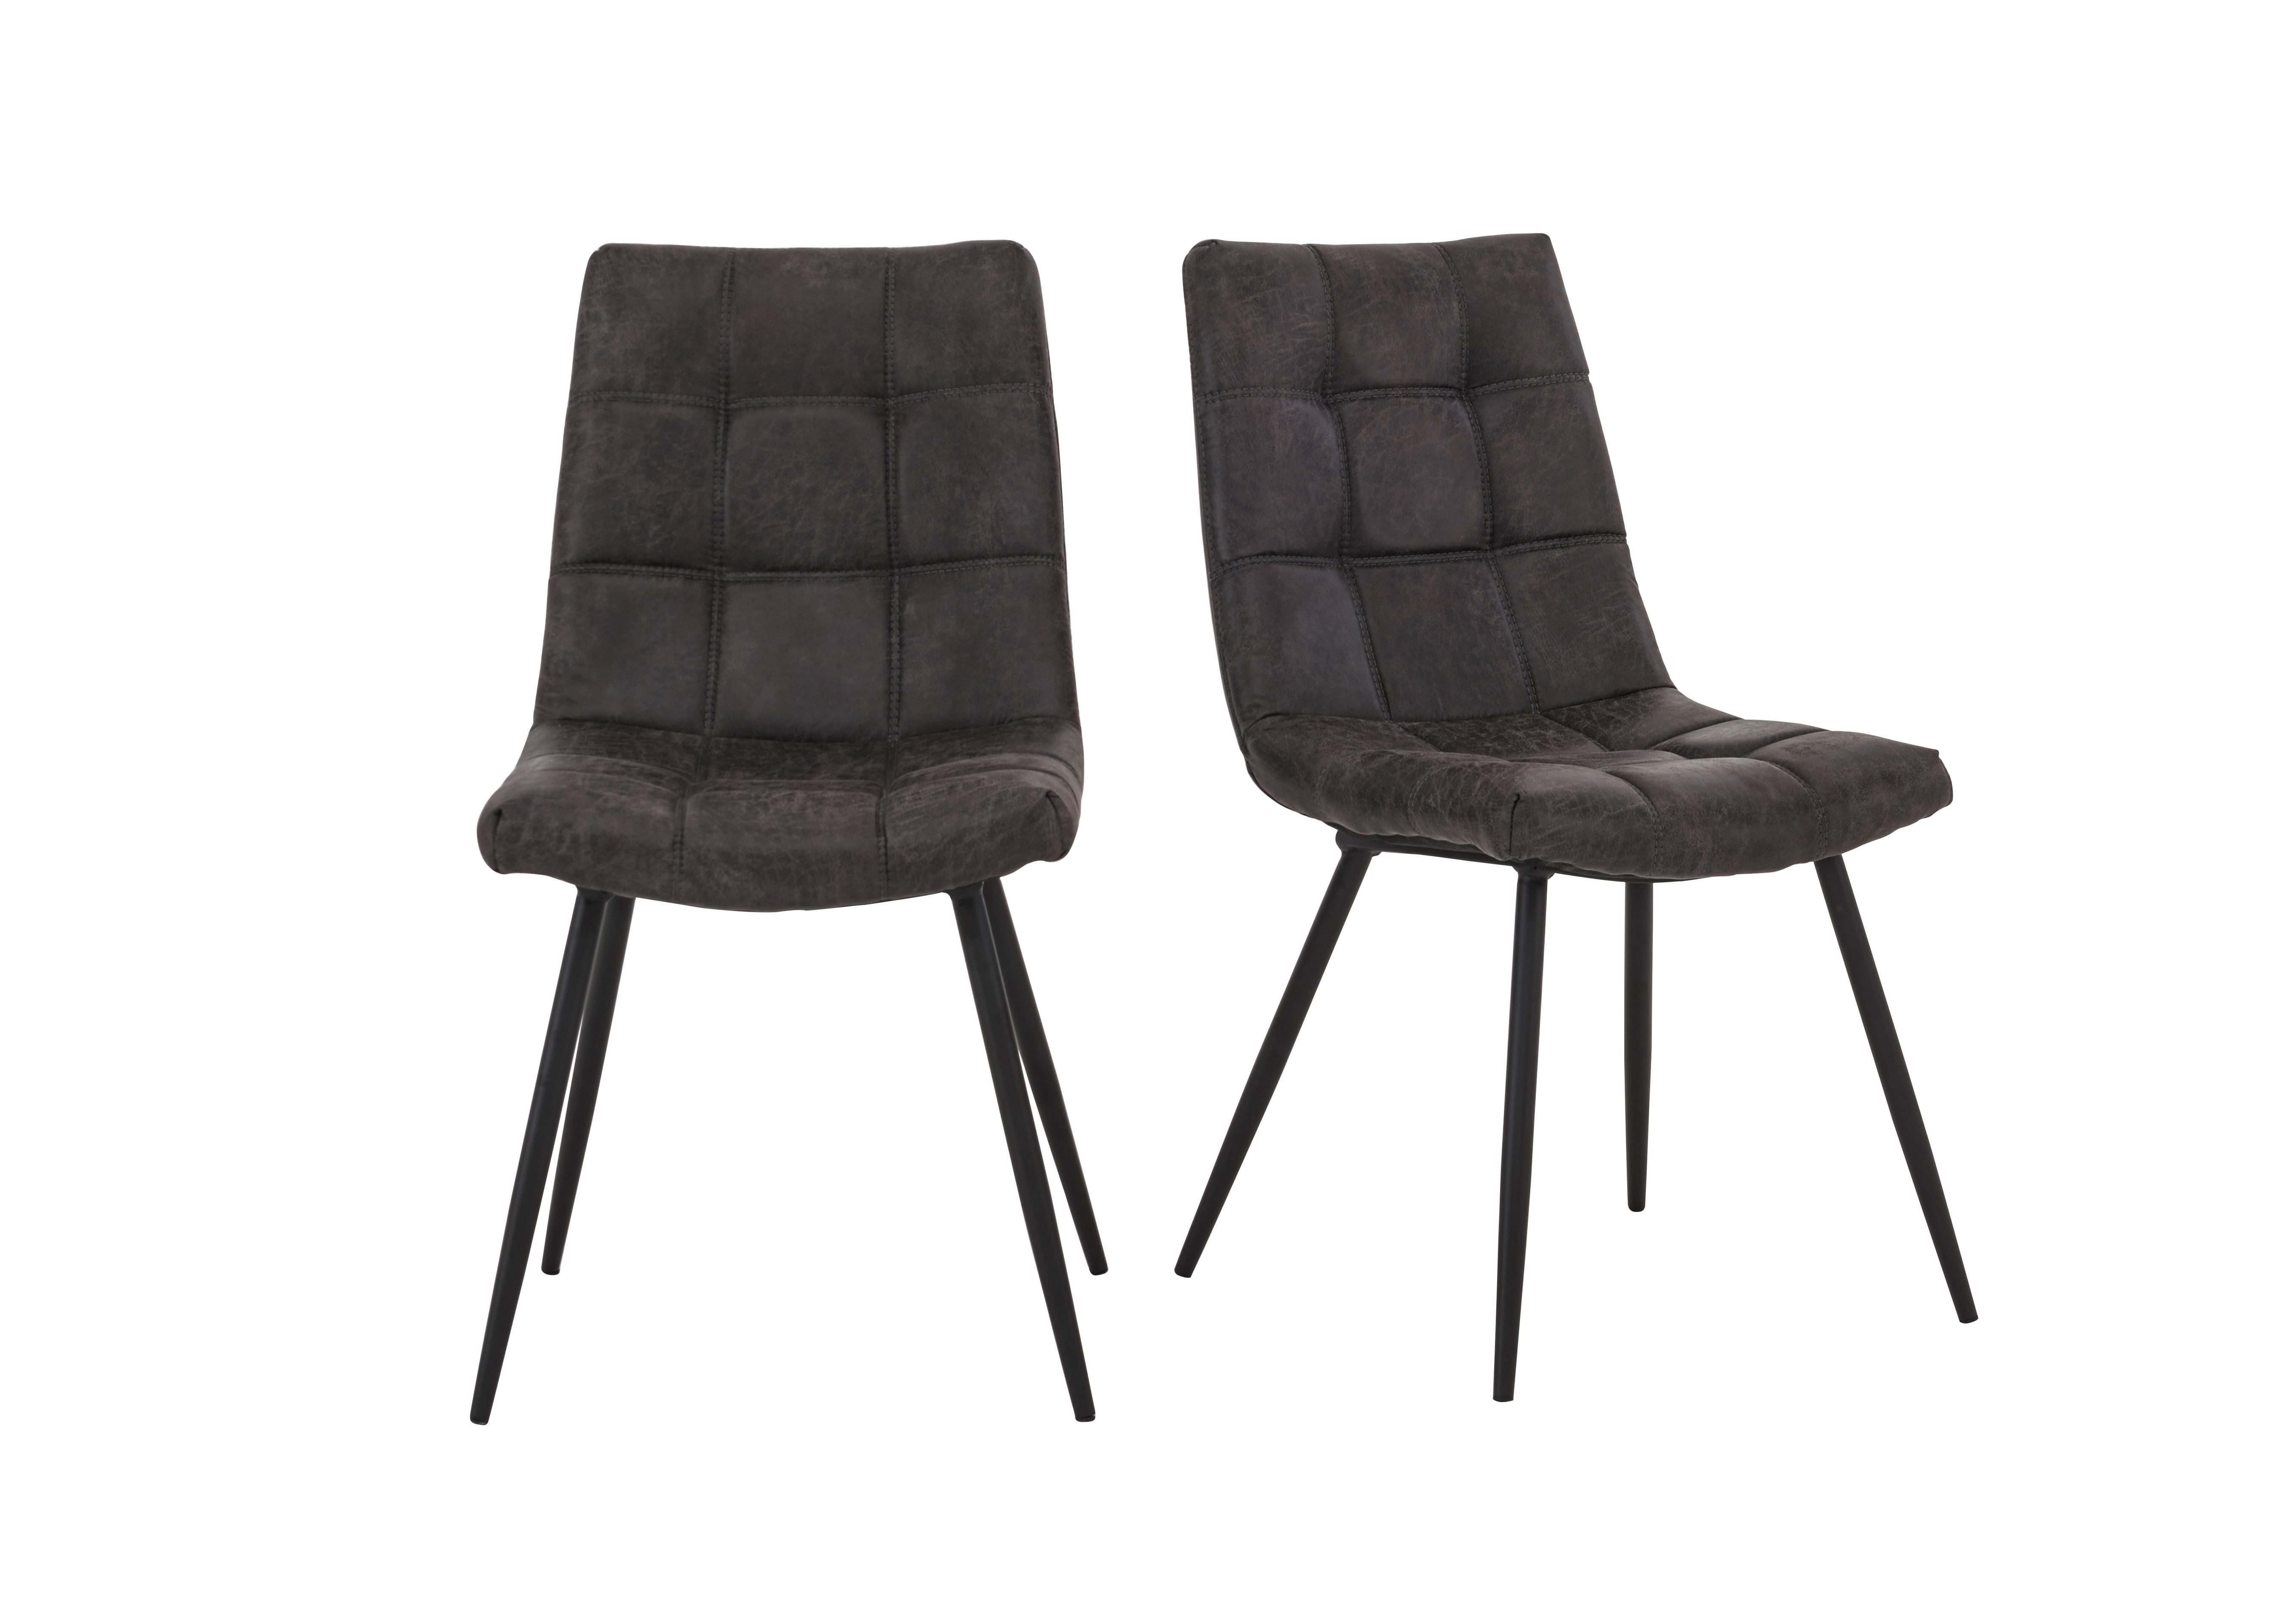 Walker Pair of Dining Chairs in Grey Faux Leather on Furniture Village